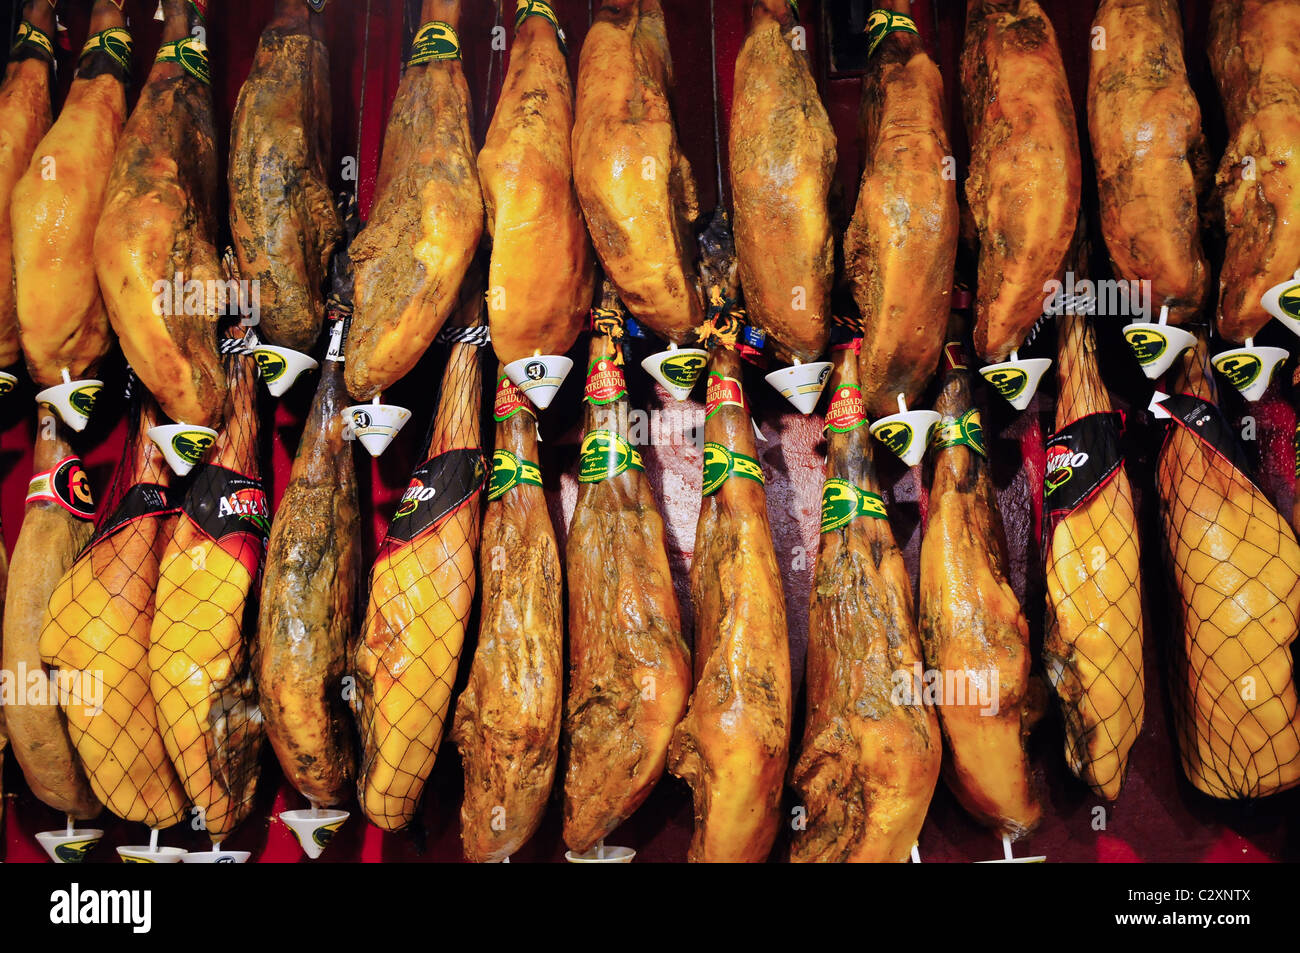 Cured pig legs, (Jamon) hanging on the wall of this pub in Madrid, Spain Stock Photo